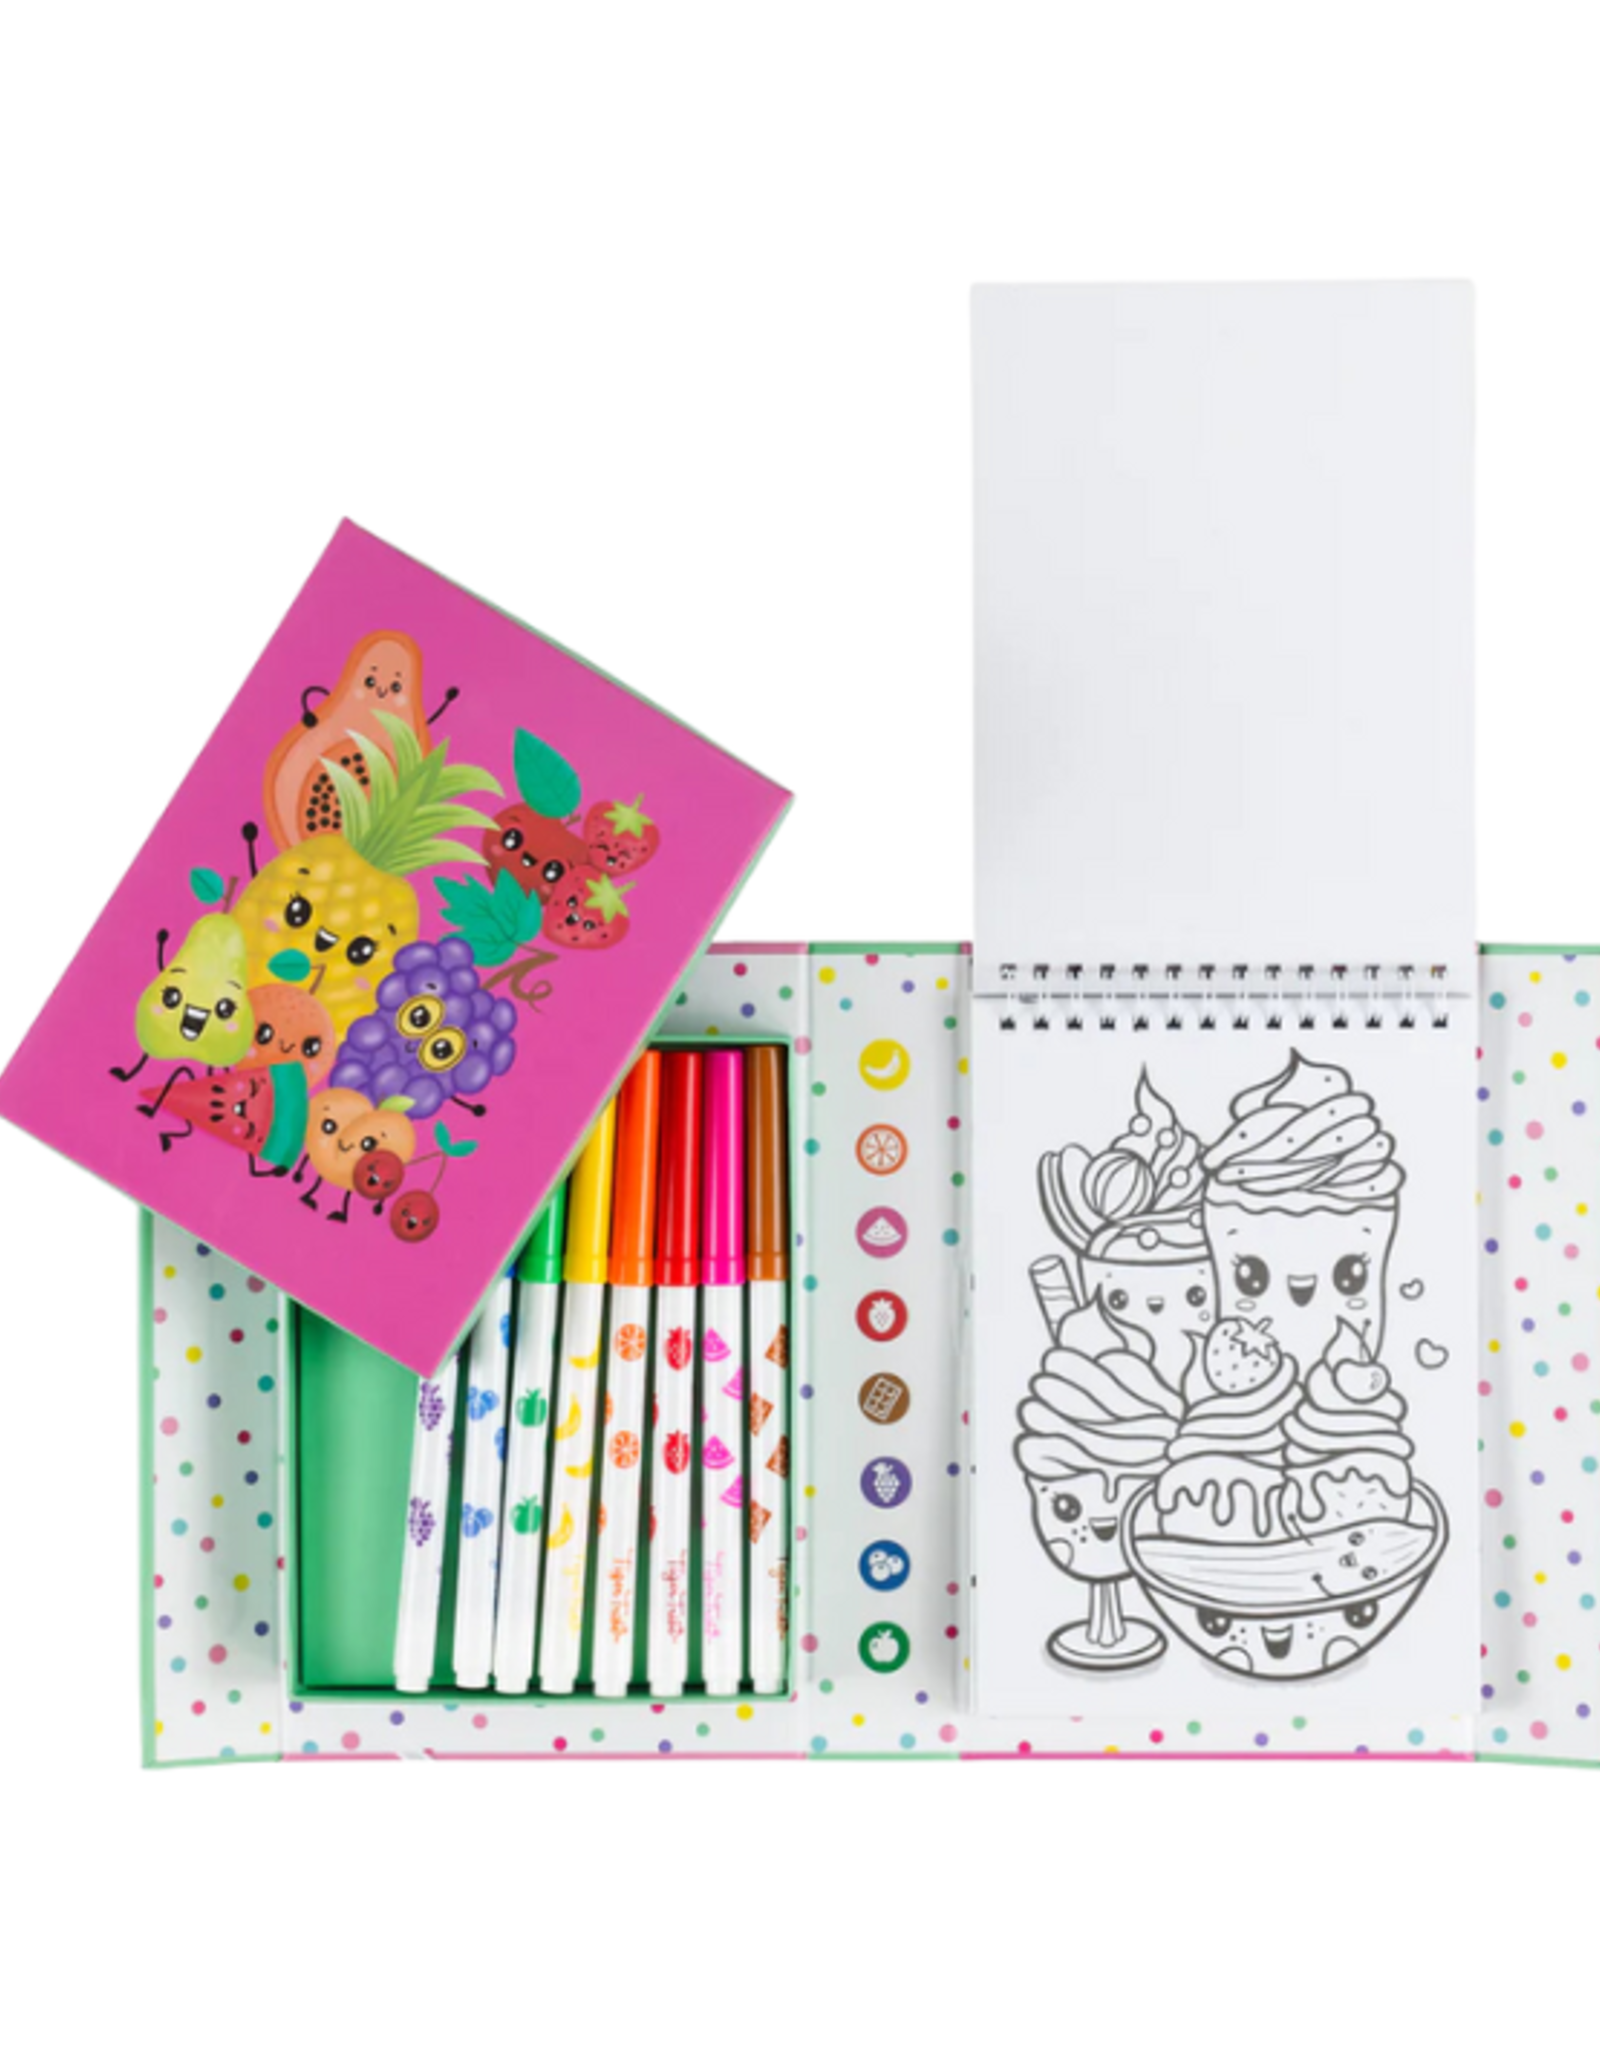 Tiger Tribe - Scented Colouring - Fruity Cutie